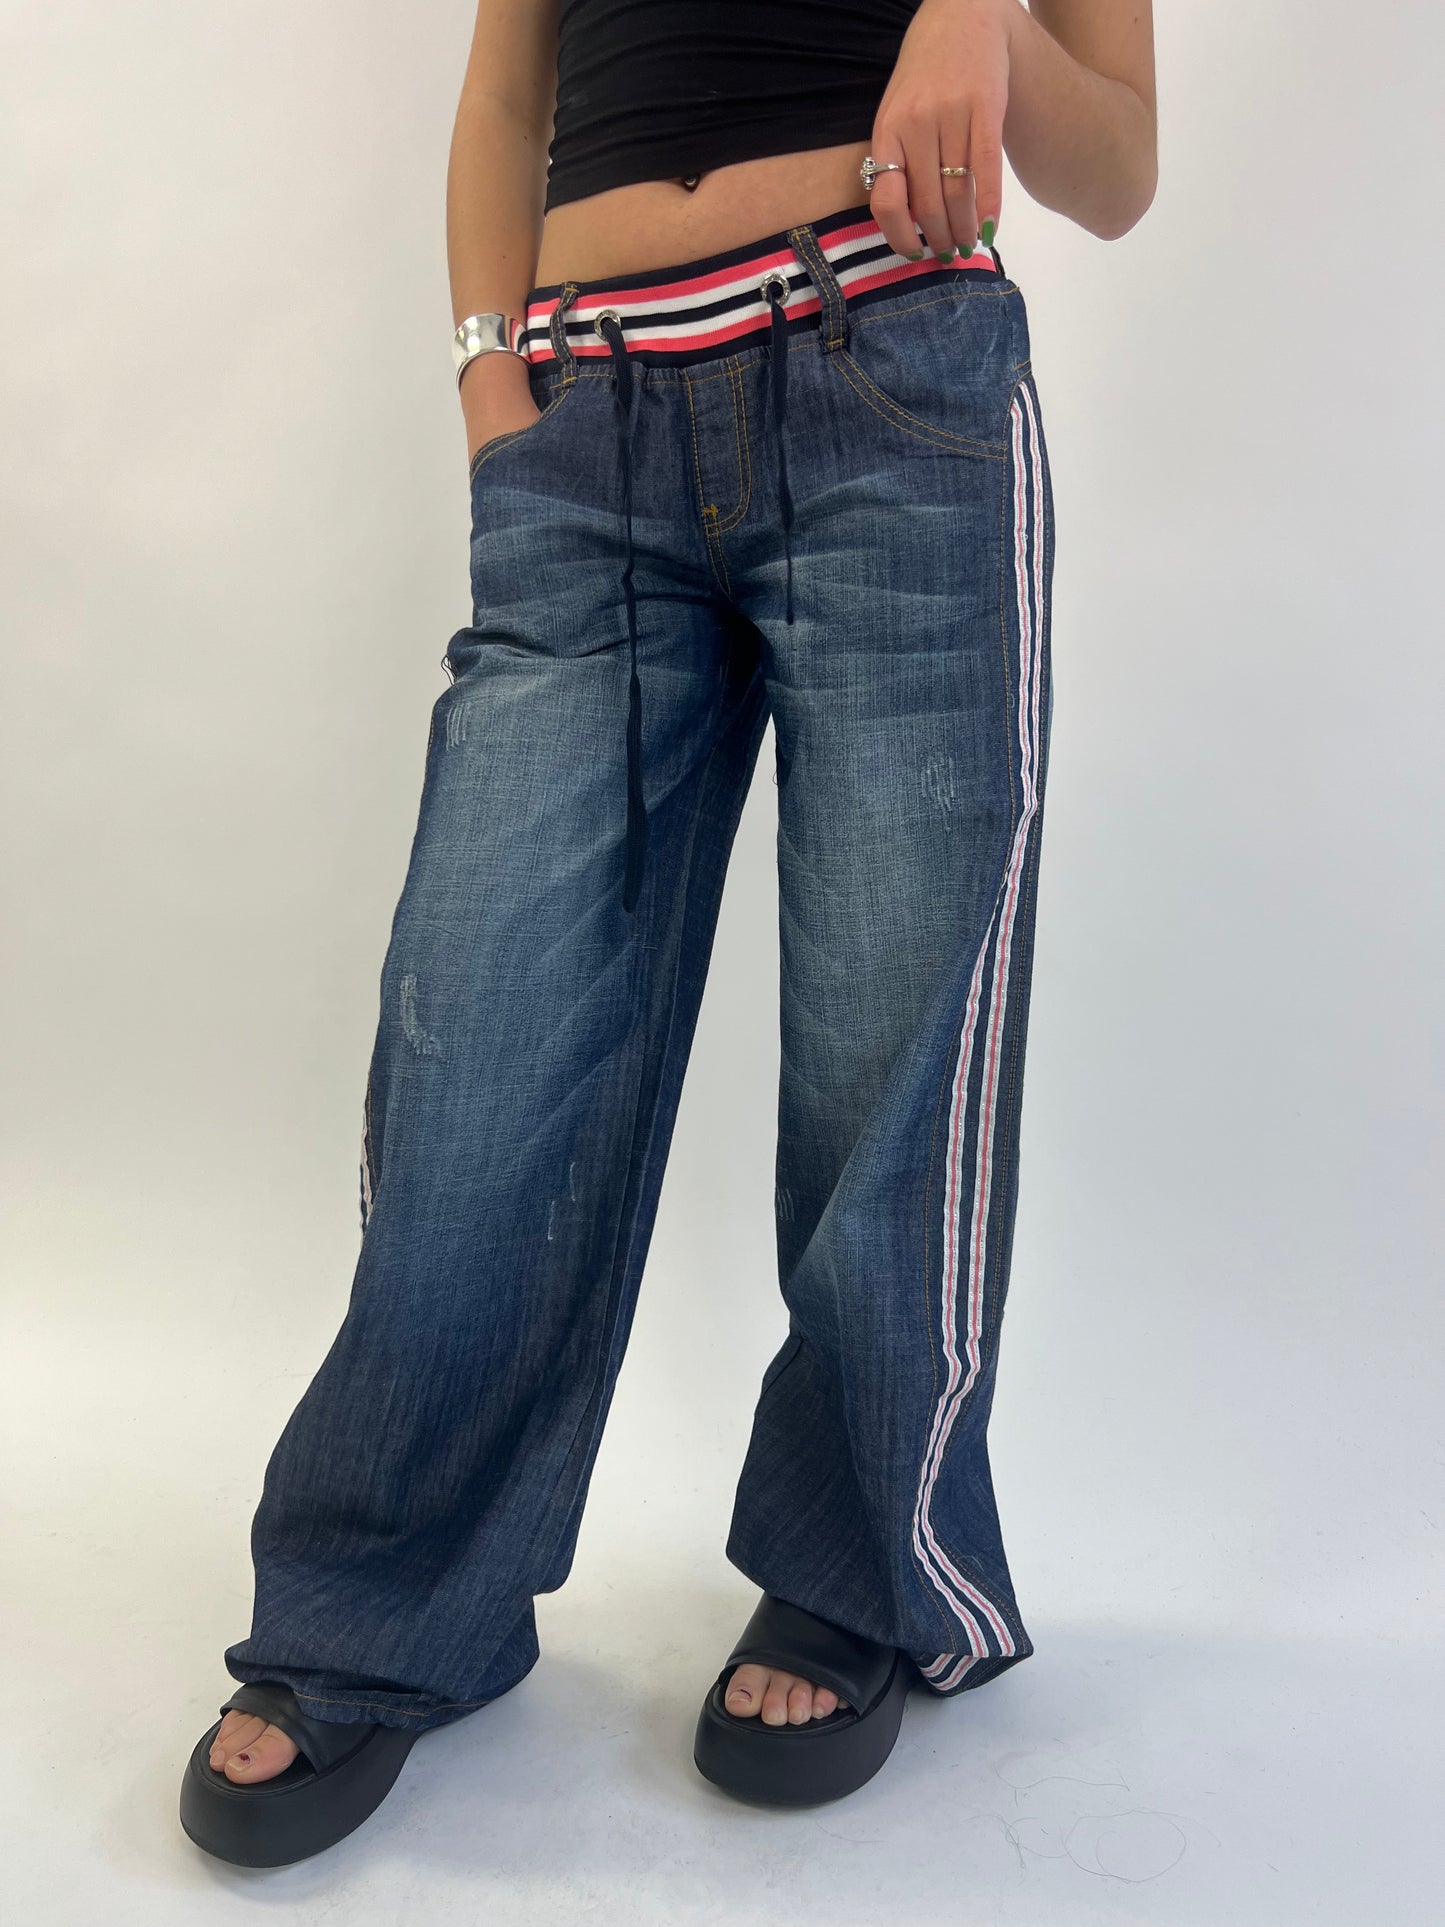 Low-rise Wide Leg Jeans With Pink/White Elasticated Waistband